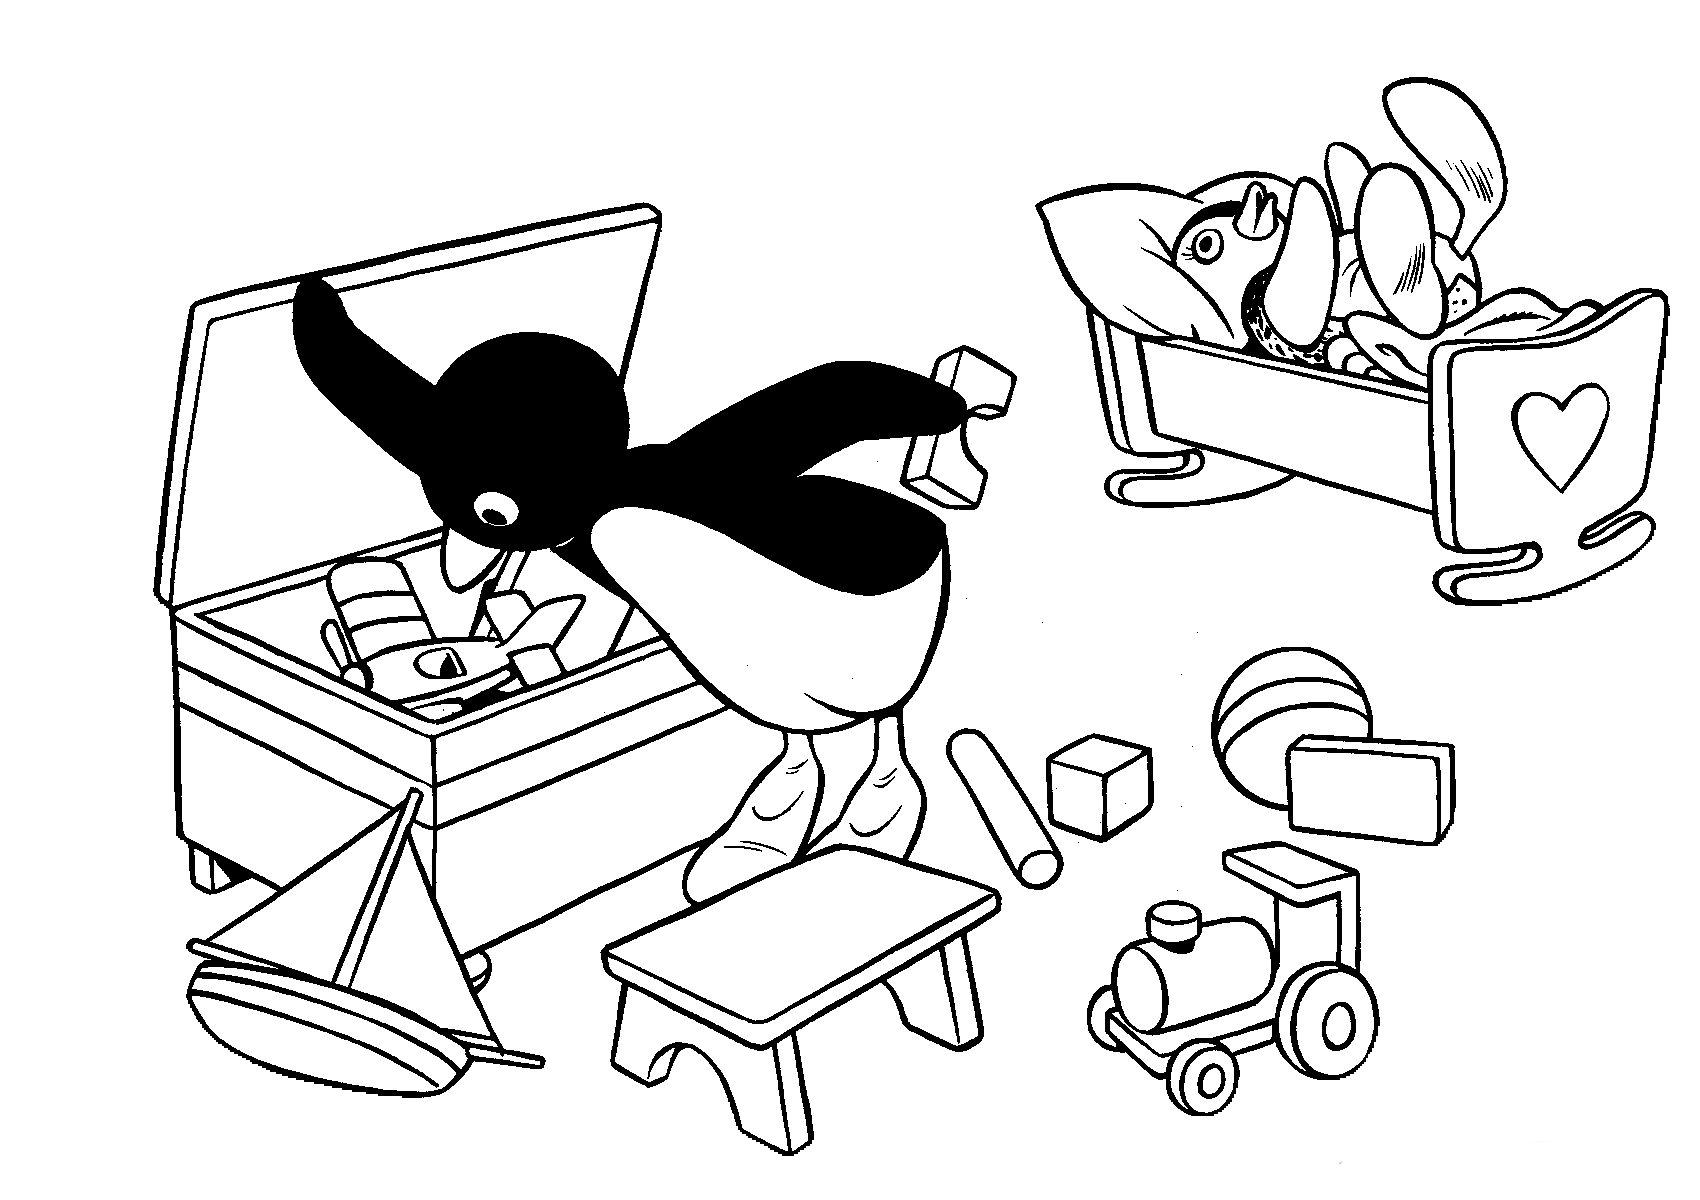 Drawing 12 from Pingu coloring page to print and coloring